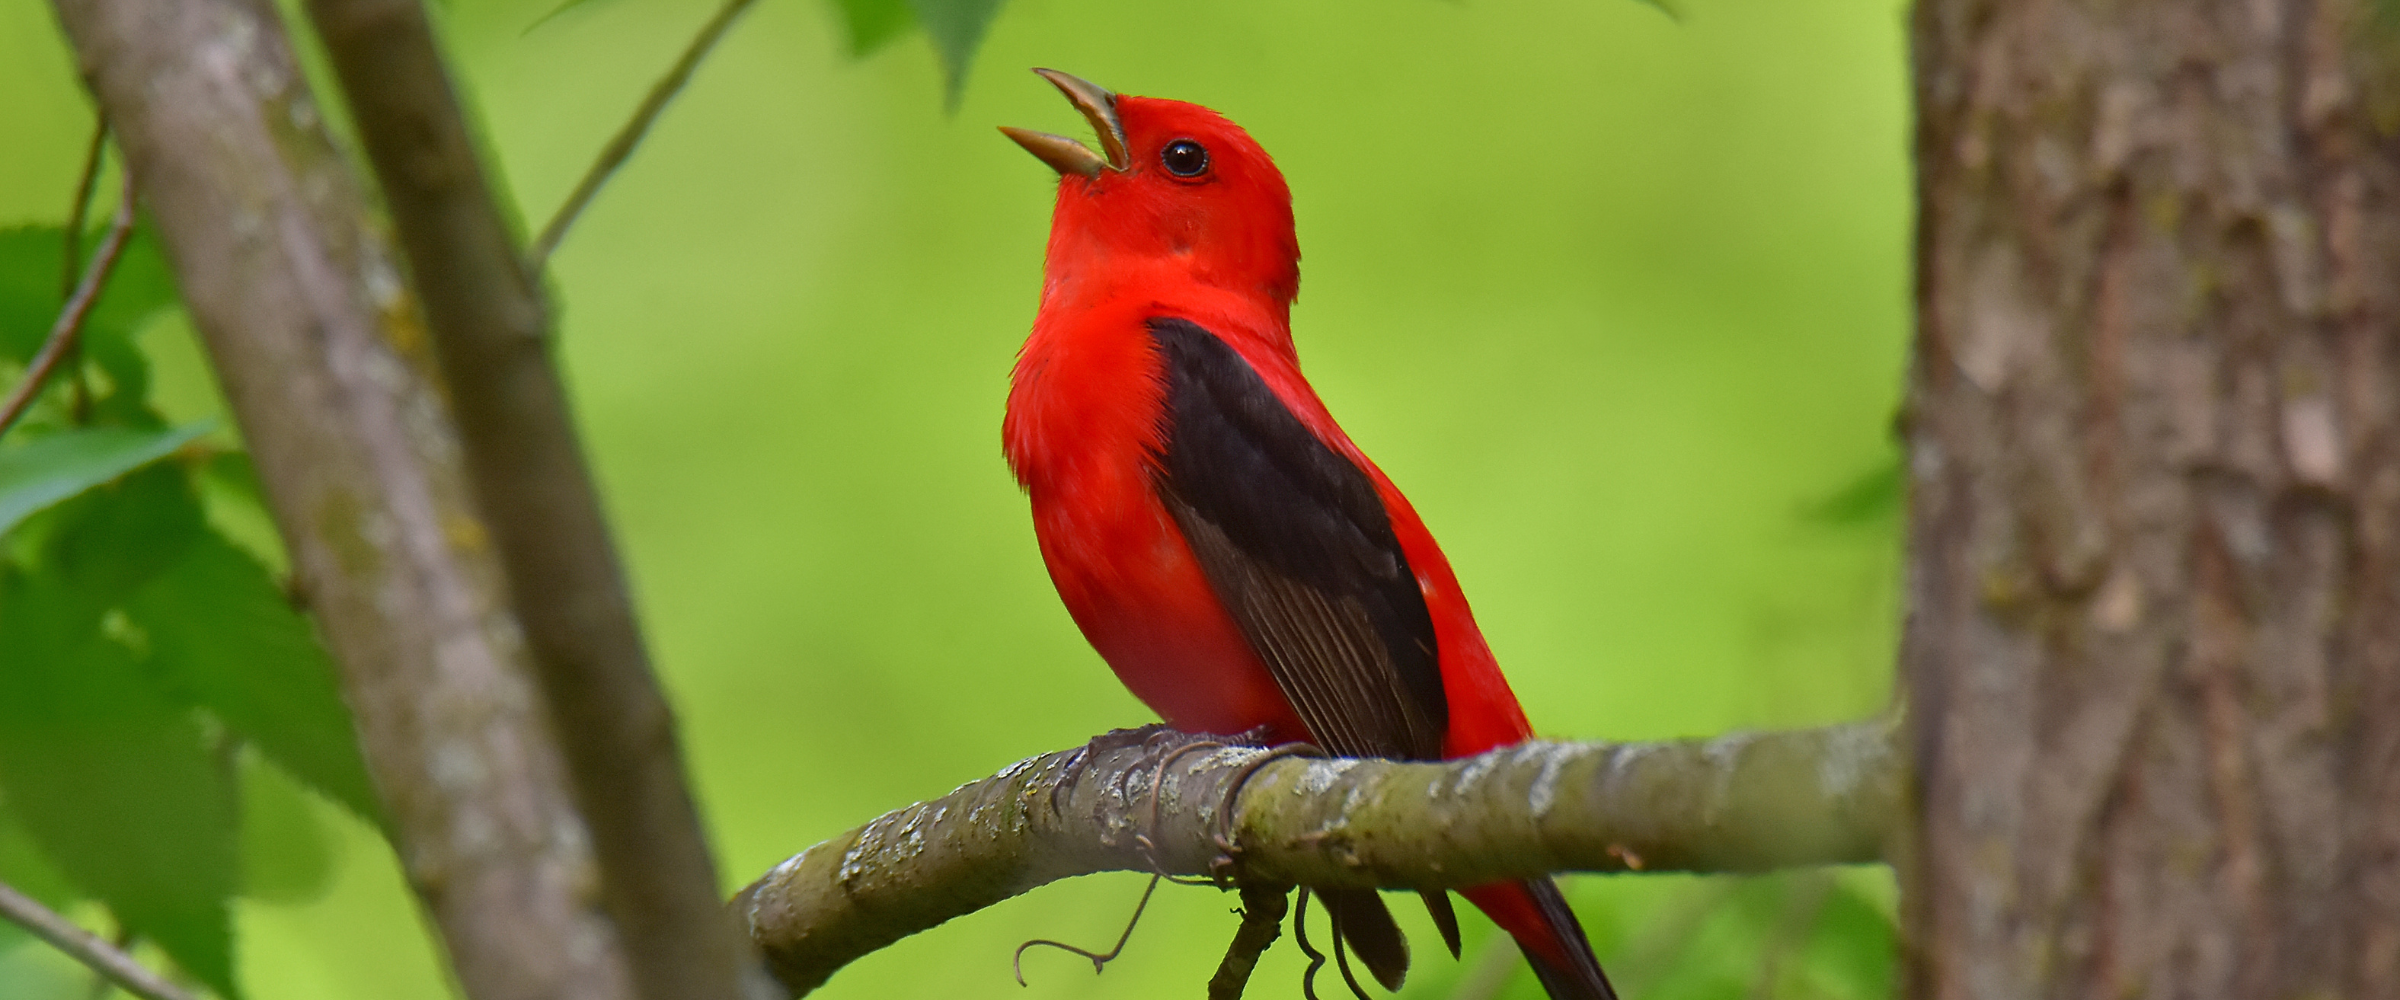 A bright red male Scarlet Tanager perched on a branch, surrounded by leaves, beak open as it sings.